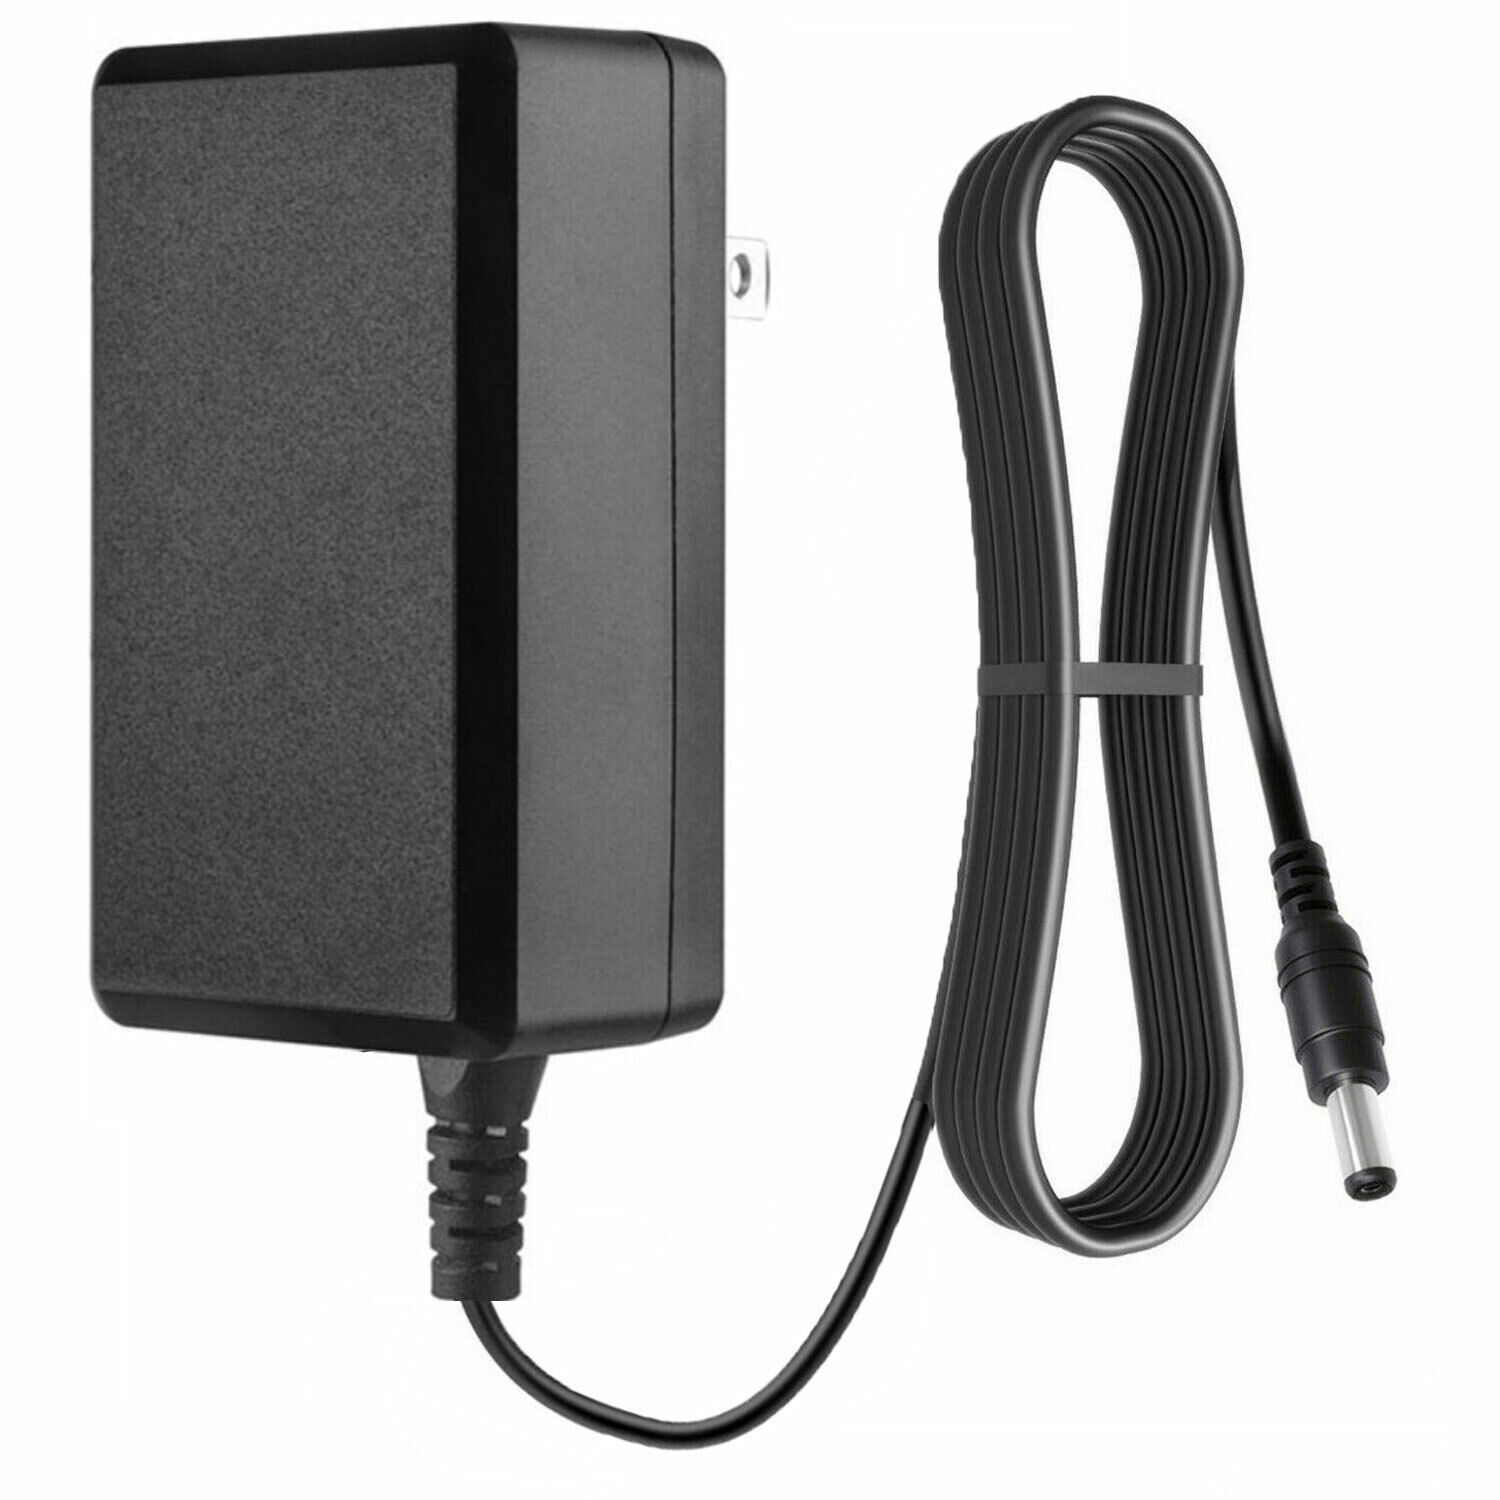 AC DC Adapter for Life Fitness 95Li Commercial Summit Trainer Elliptical Charger Input Voltage: AC 100-240V (Worldwide